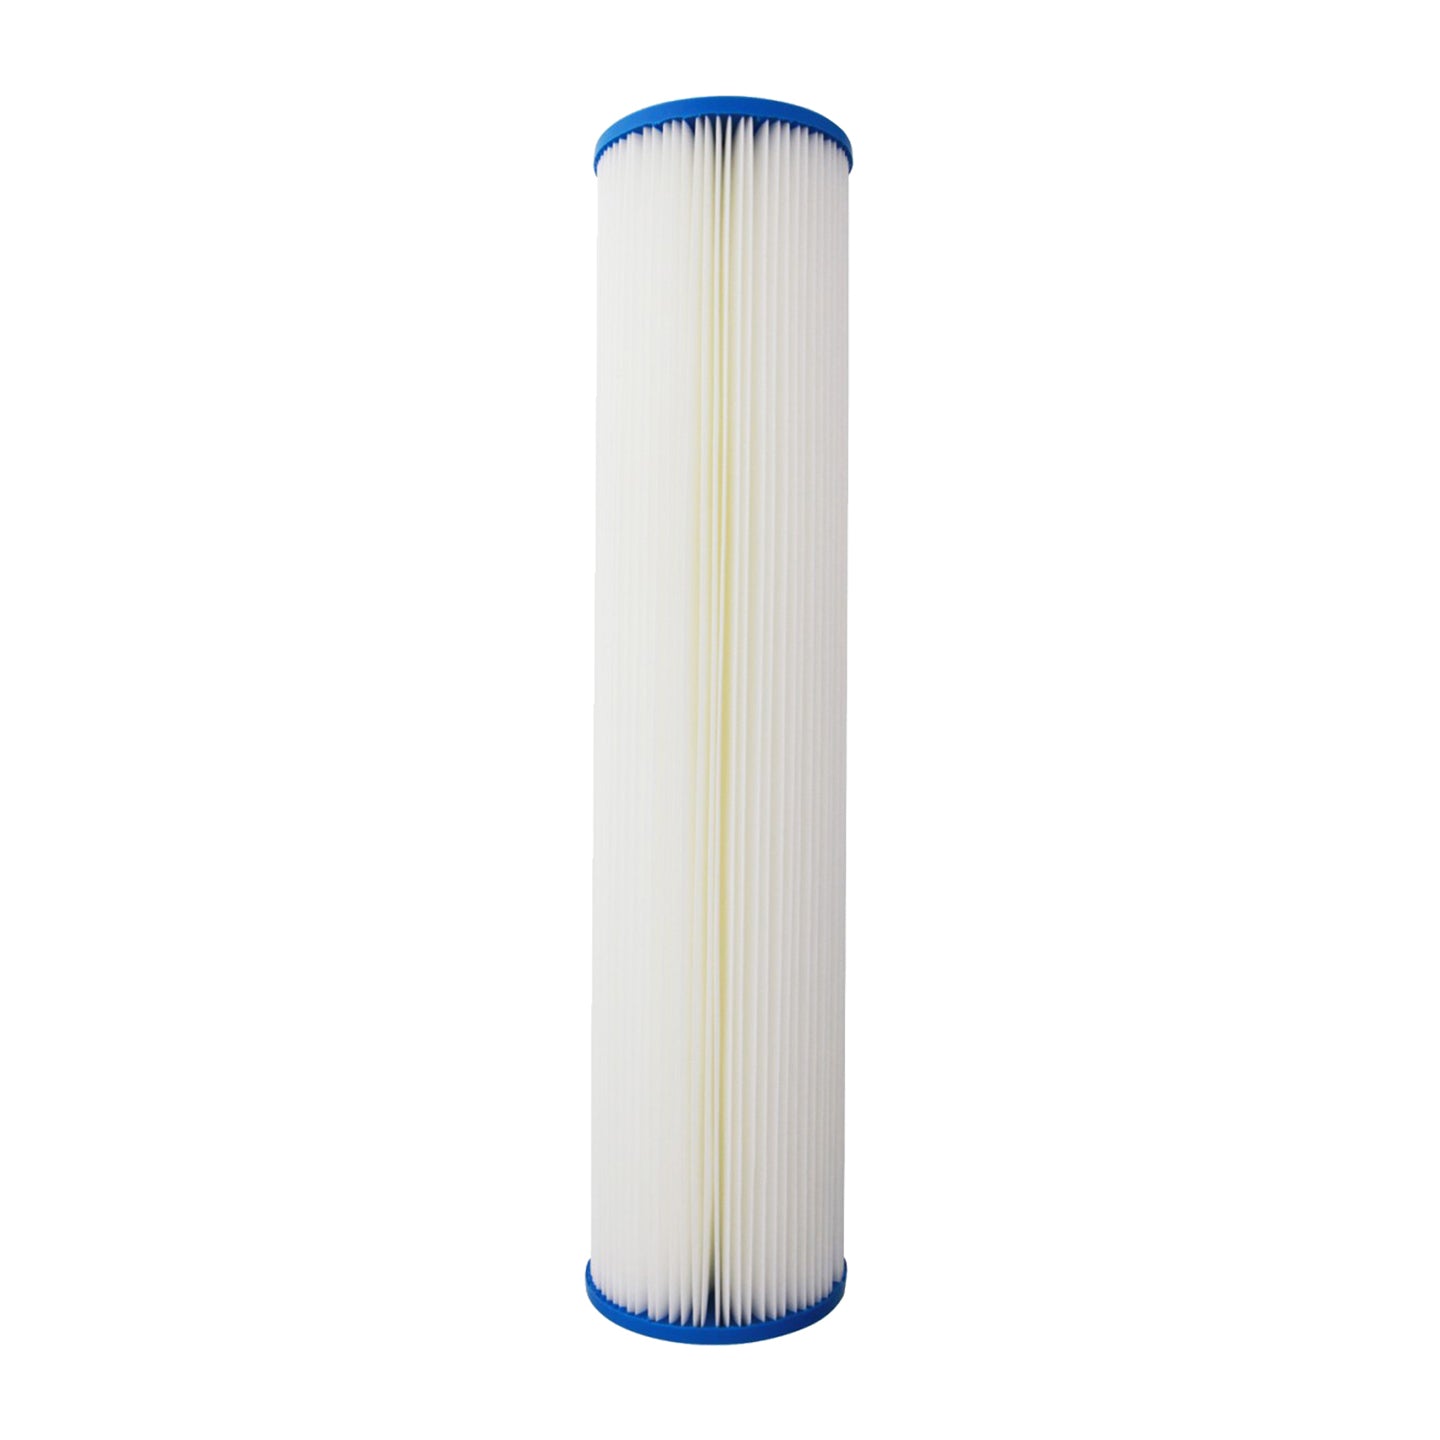 SPC-45-2020 Hydronix Comparable Pleated Sediment Water Filter by Tier1